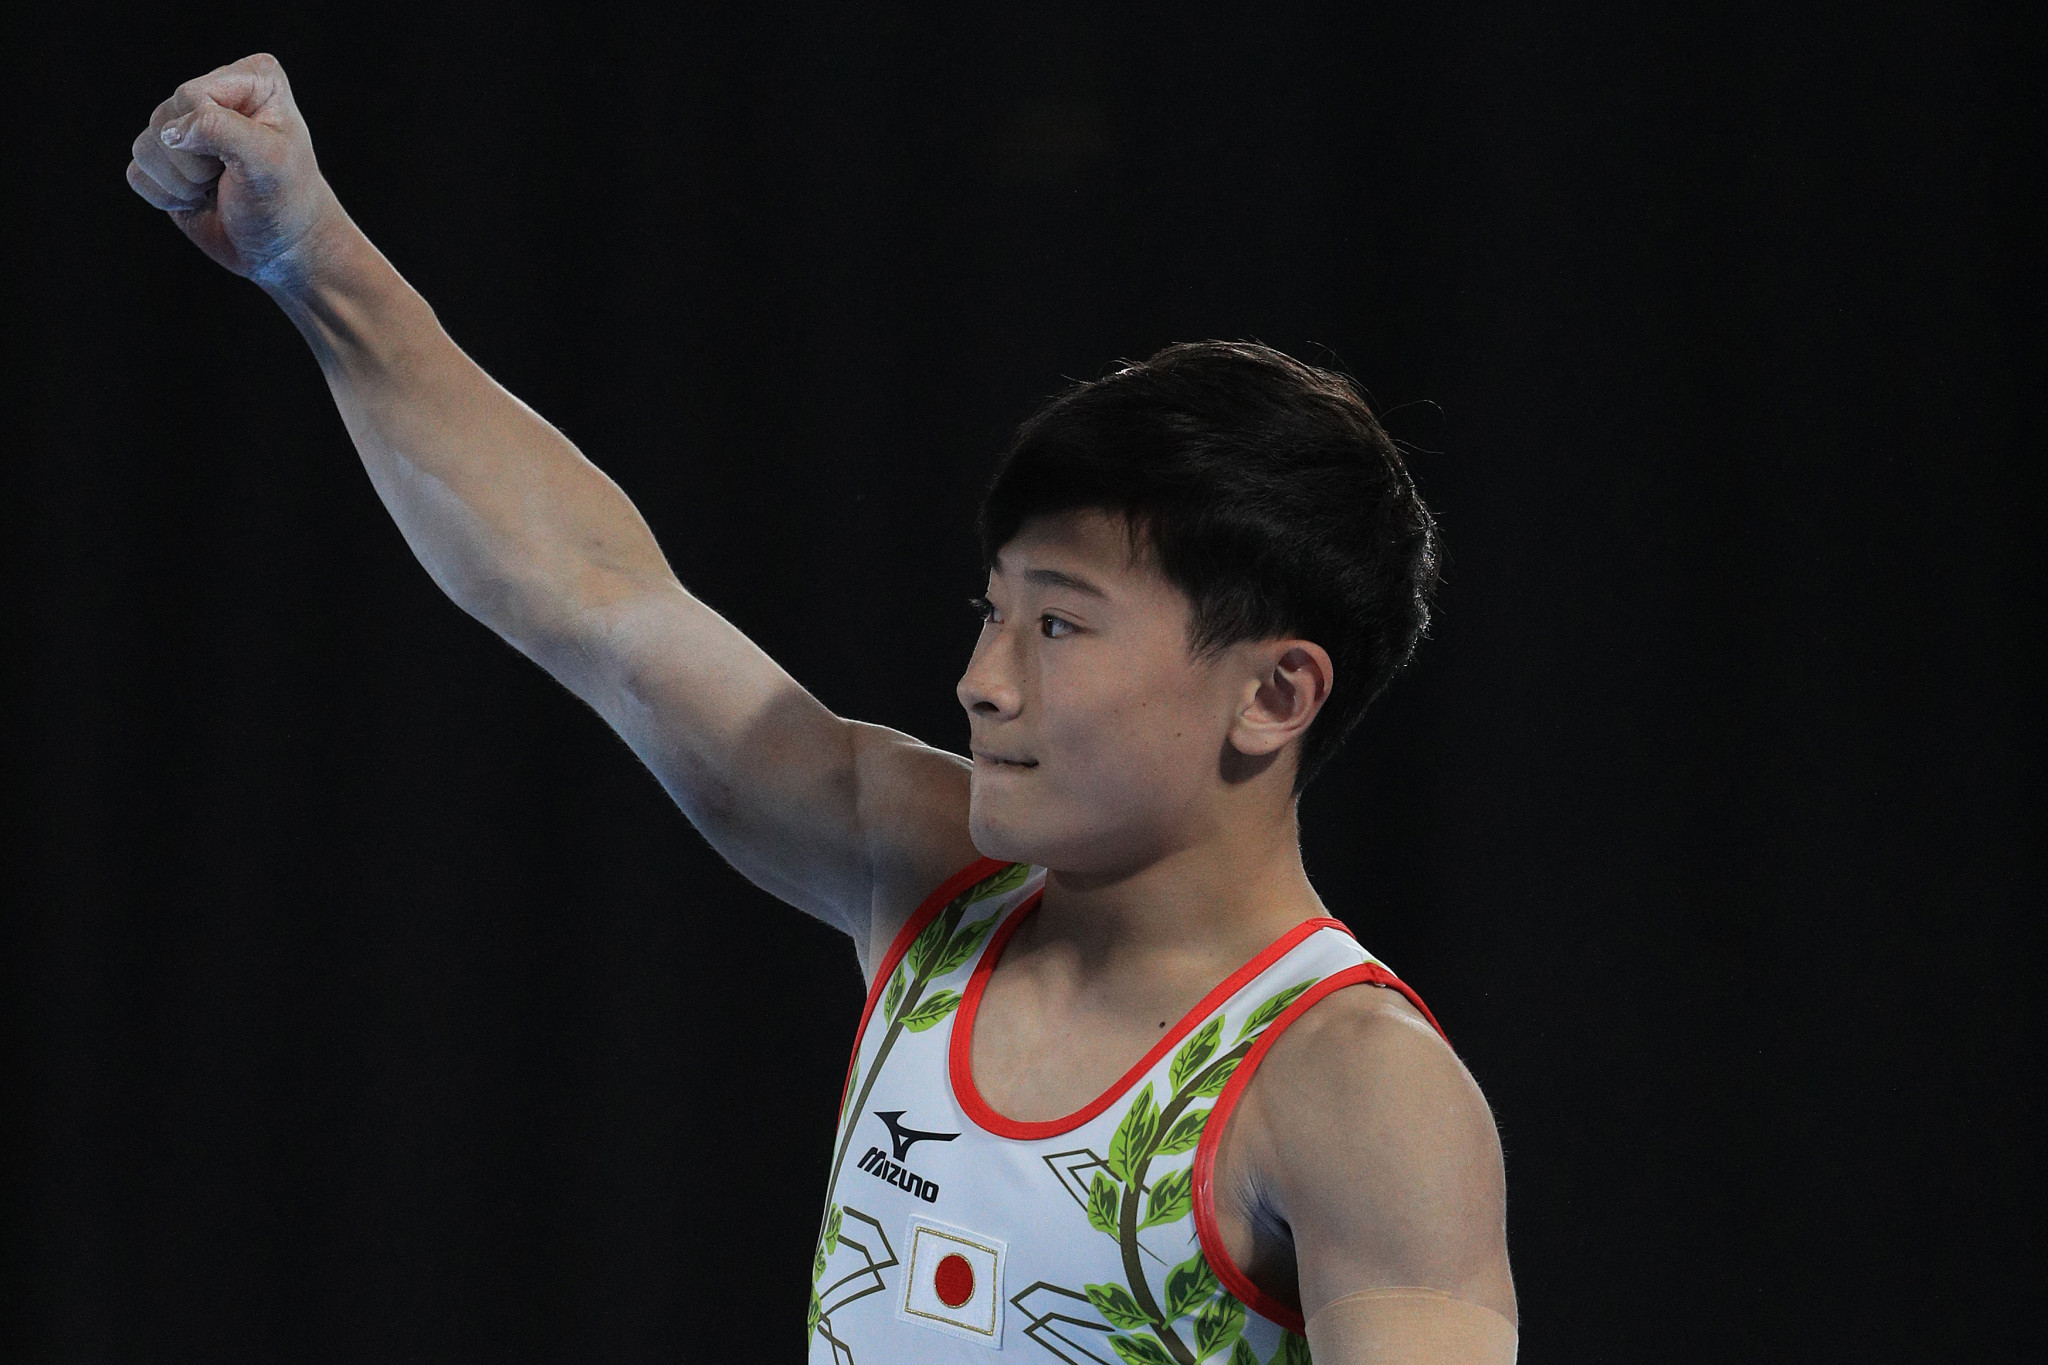 Takeru Kitazono claimed five gymnastics medals at Buenos Aires 2018 ©Getty Images